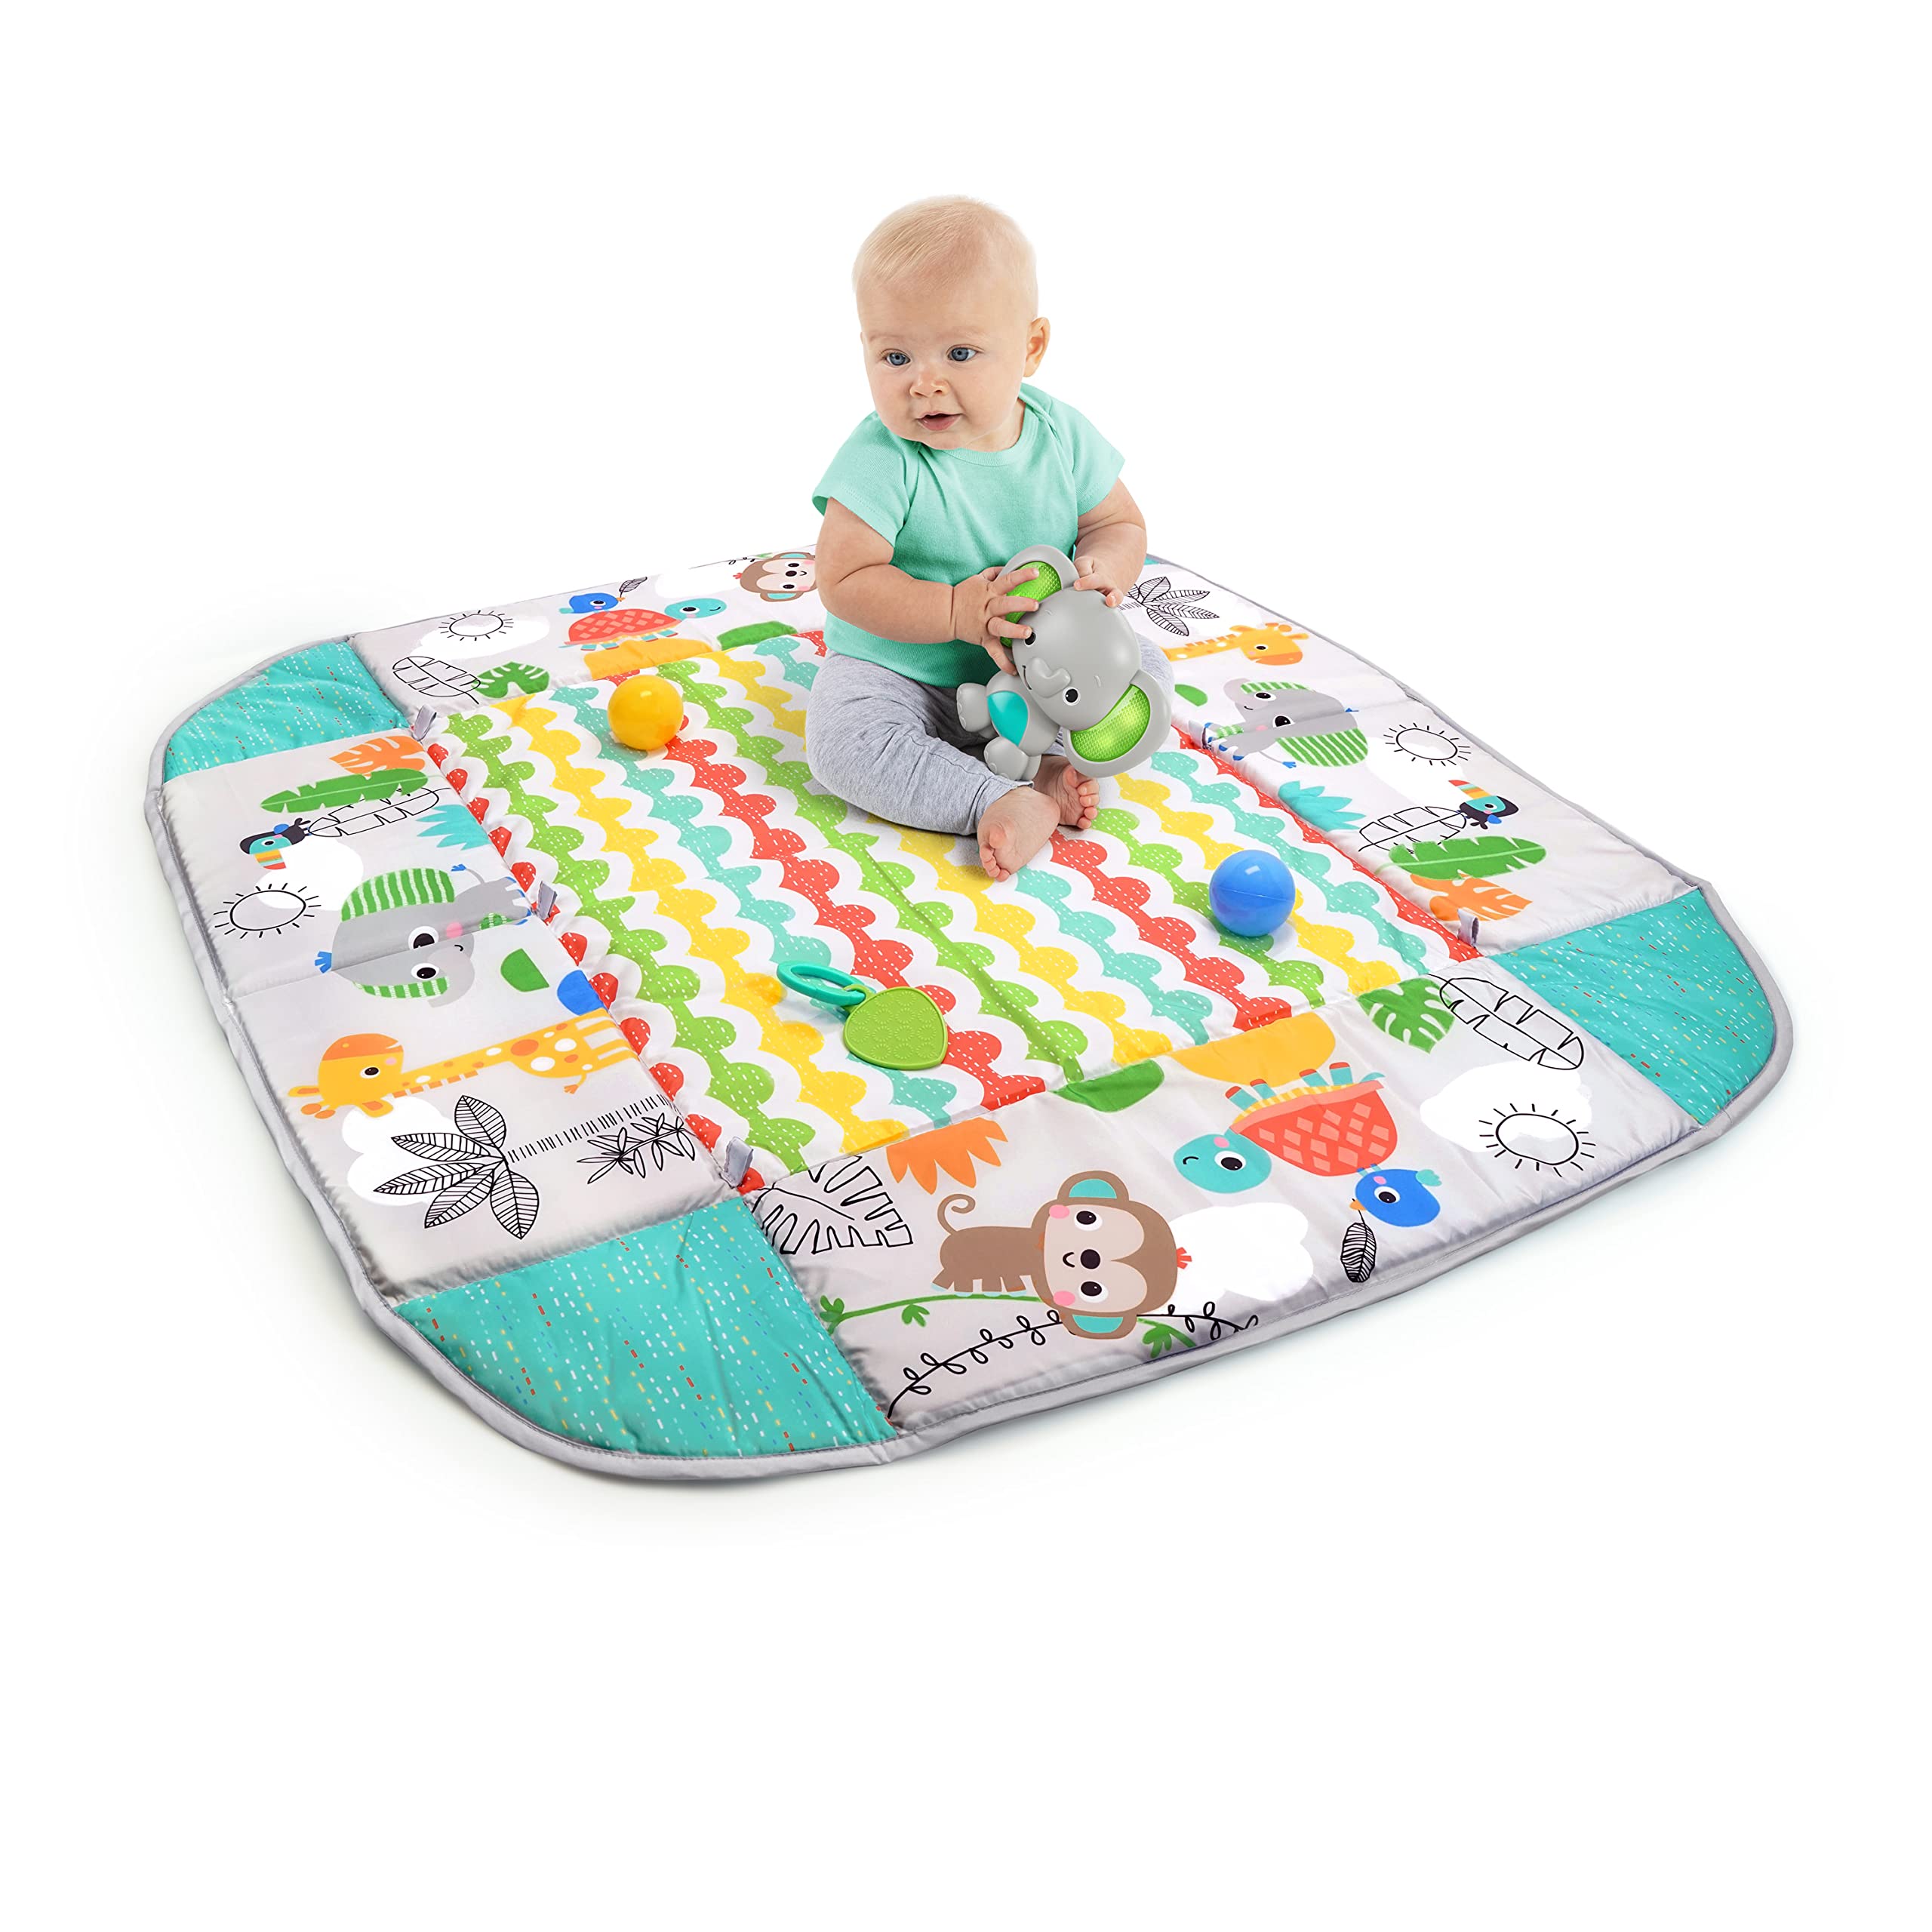 Bright Starts 5-in-1 Your Way Ball Play - Jumbo Play Mat Converts to Ball Pit Baby Gym, Newborn to Toddler - Totally Tropical (Green)